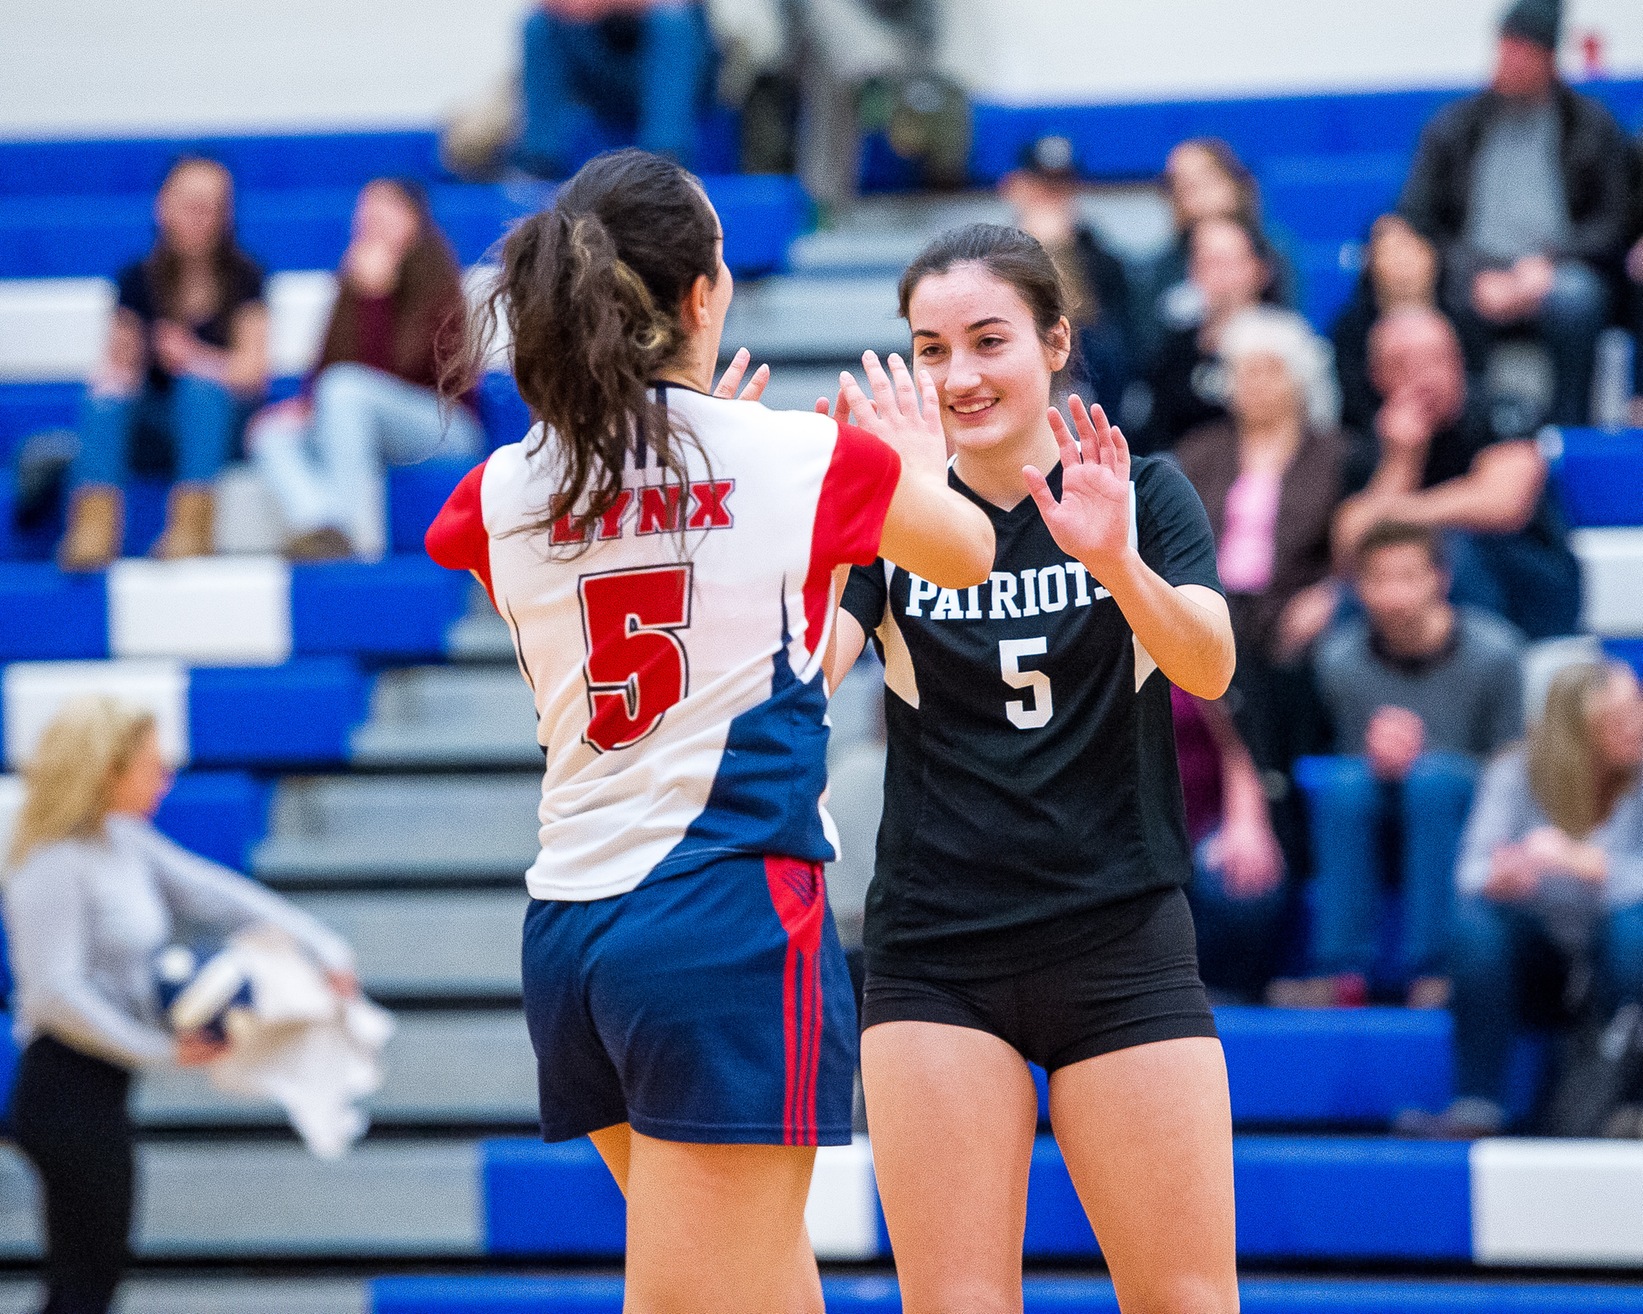 Taylor and Lafleur named MVPs of the 2018 Niagara Region Girls Volleyball Showcase